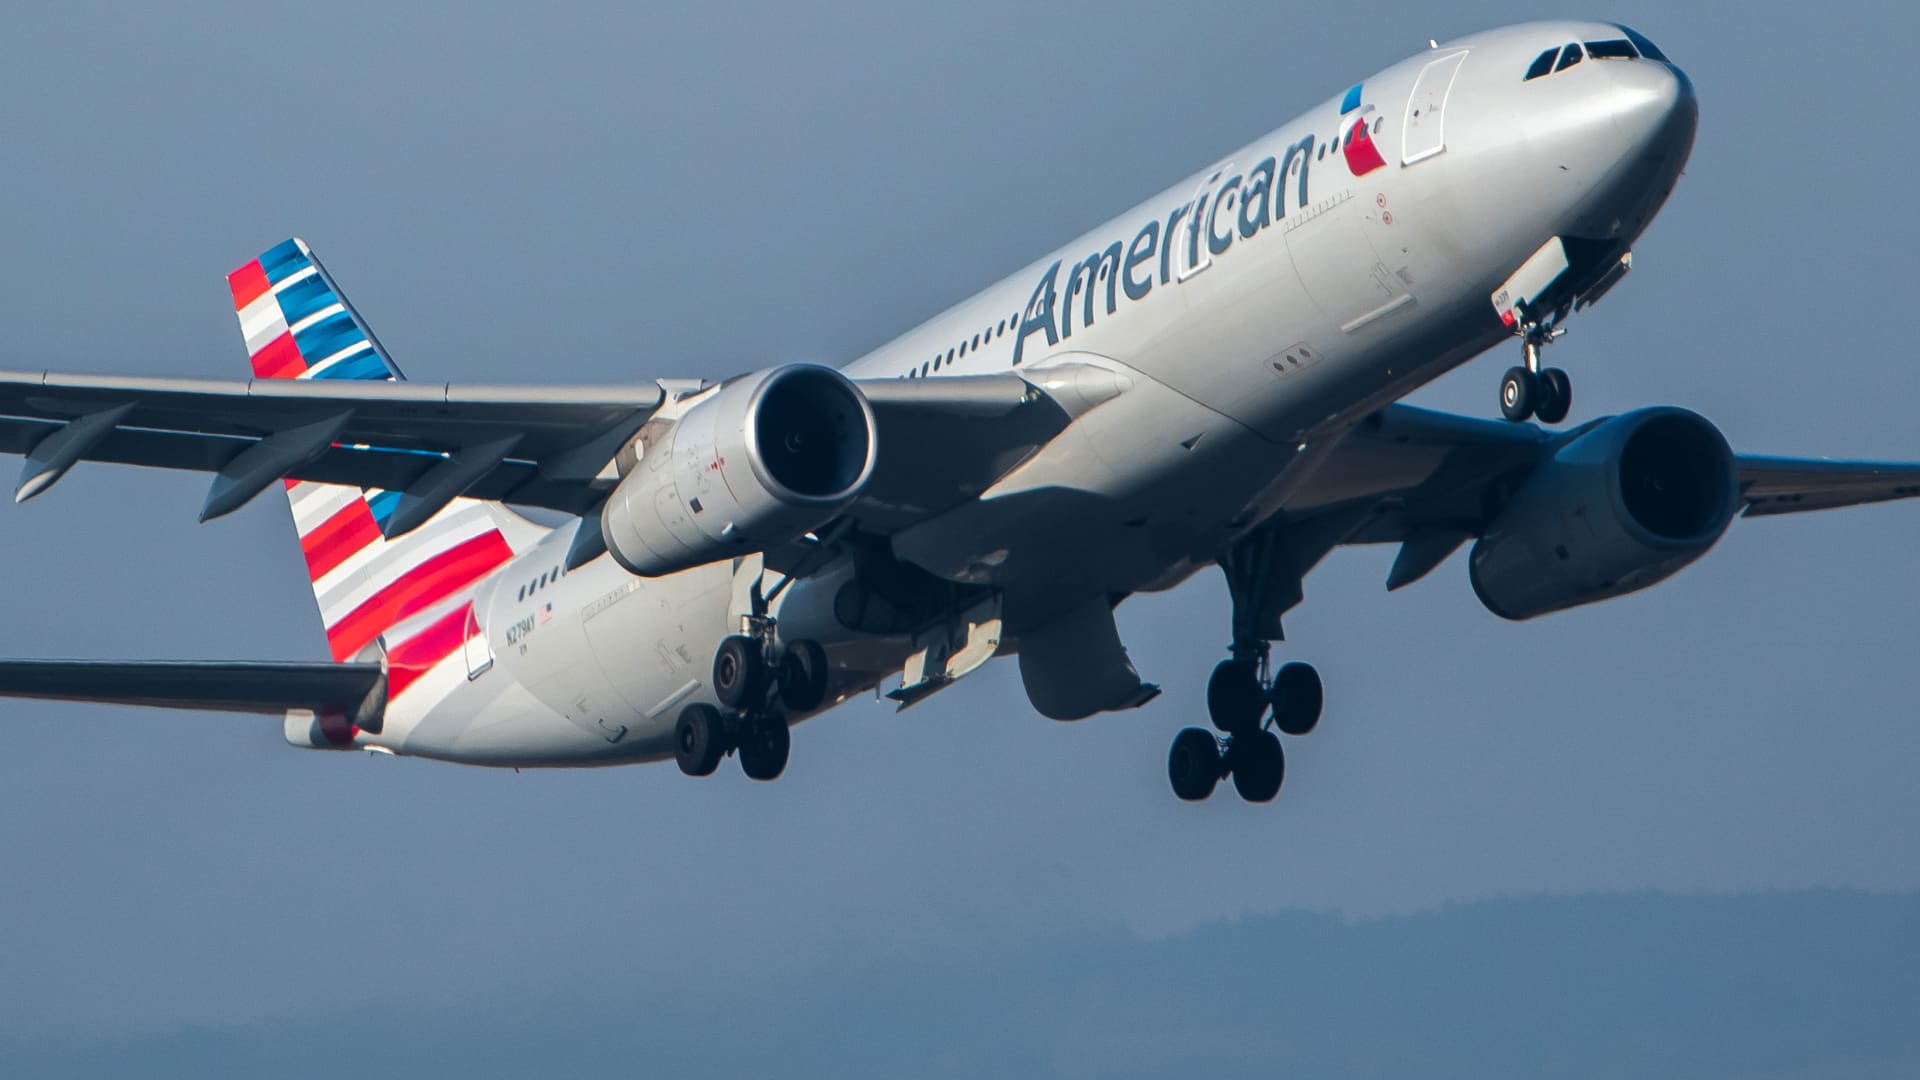 American Airlines pilots' union accepts sweetened labor deal